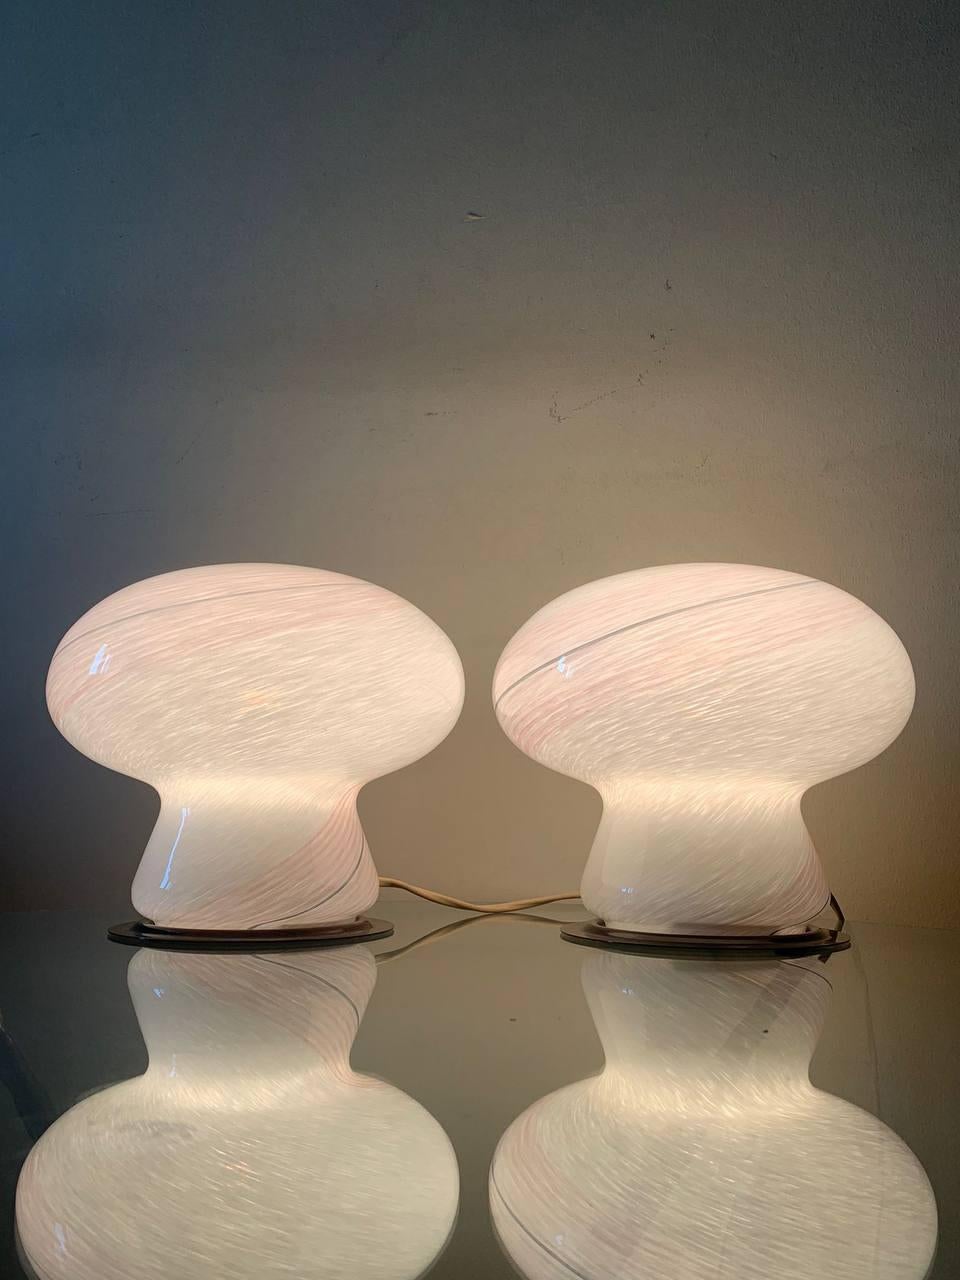 Mushroom-shaped lamps made of pink murano glass with white and gray decorations, pair available.
In good and working condition as per photos and video 